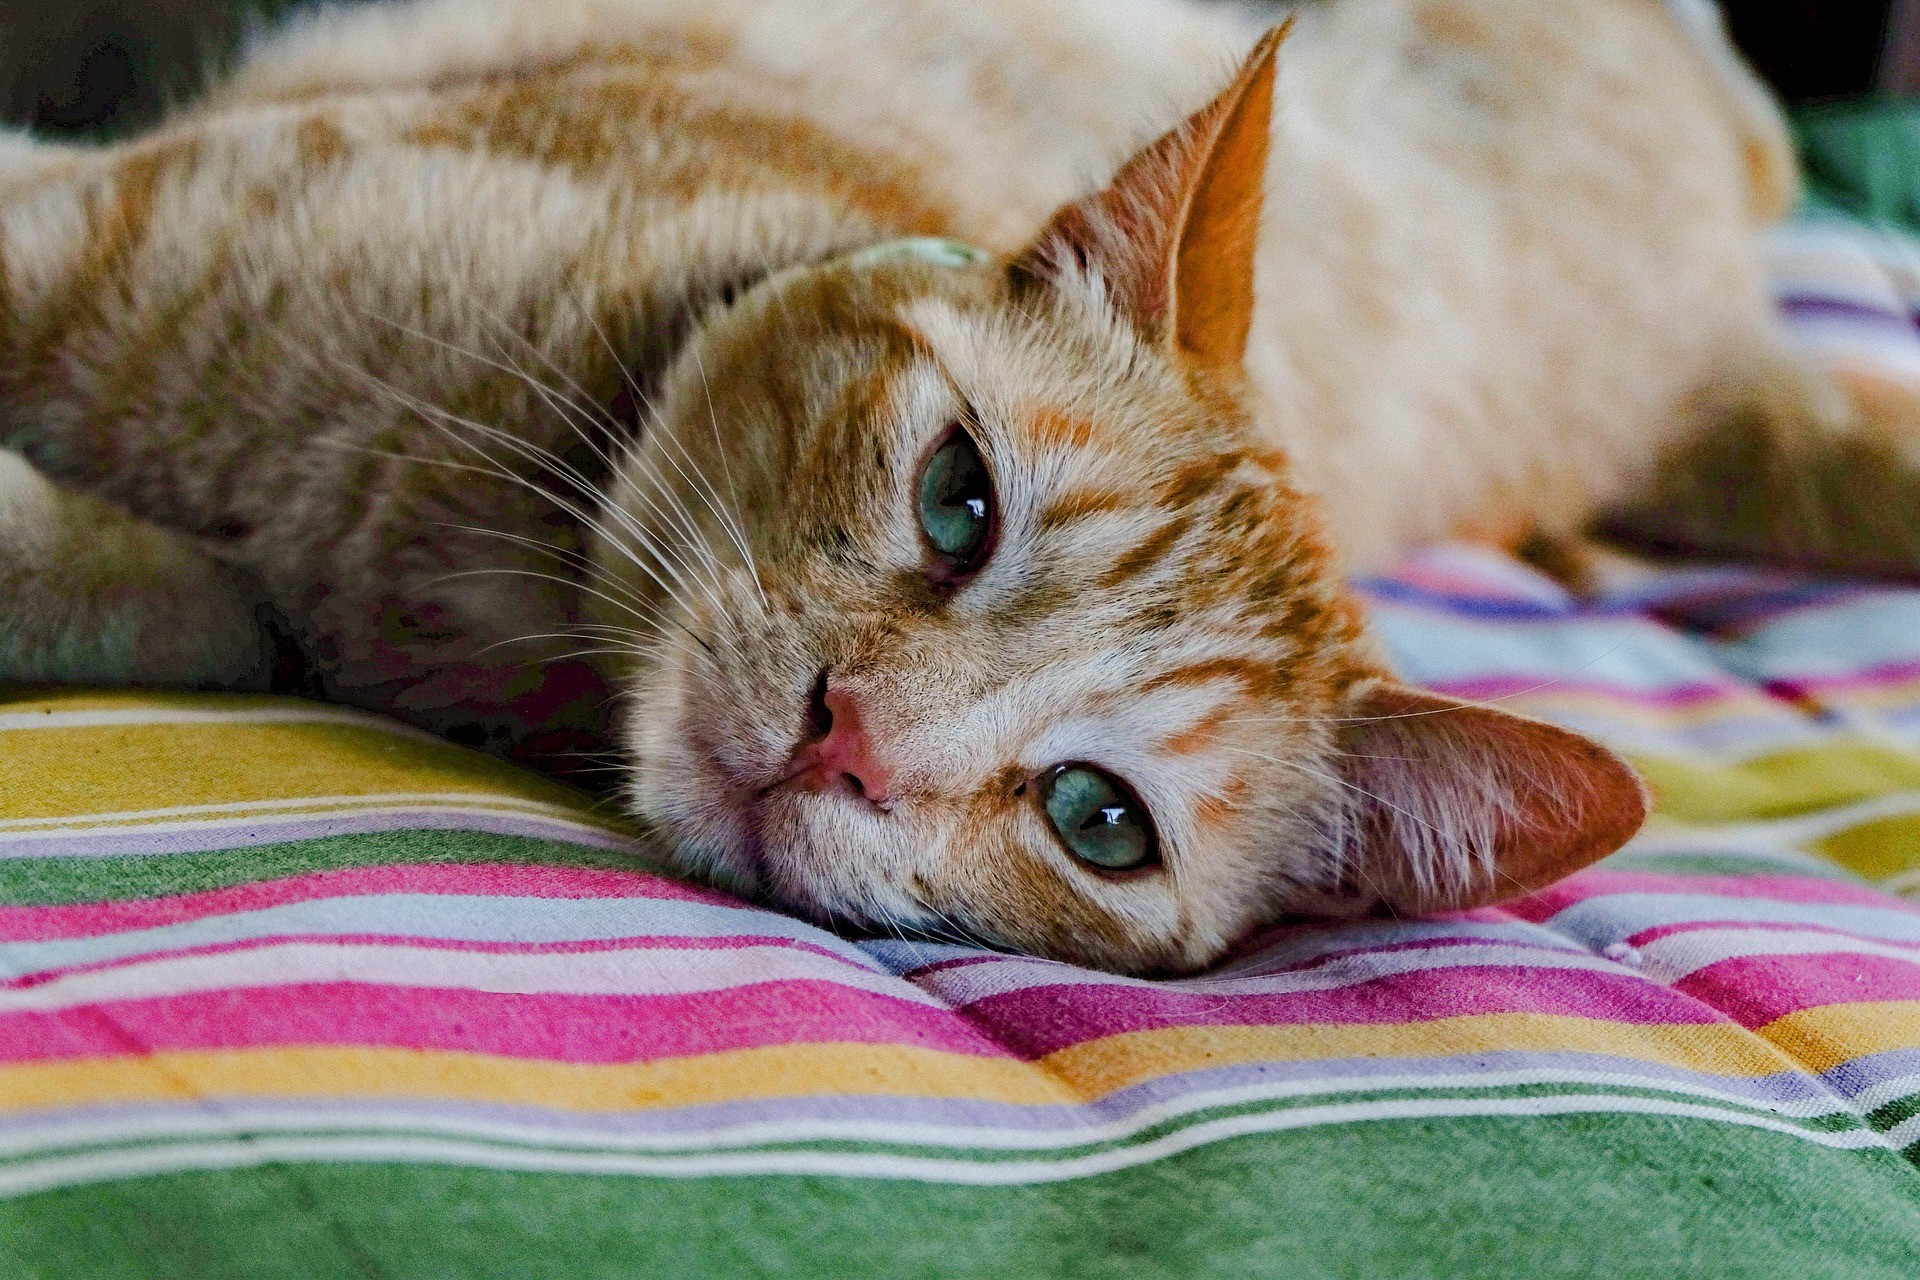 orange tabby cat lying on a colorful striped cushion